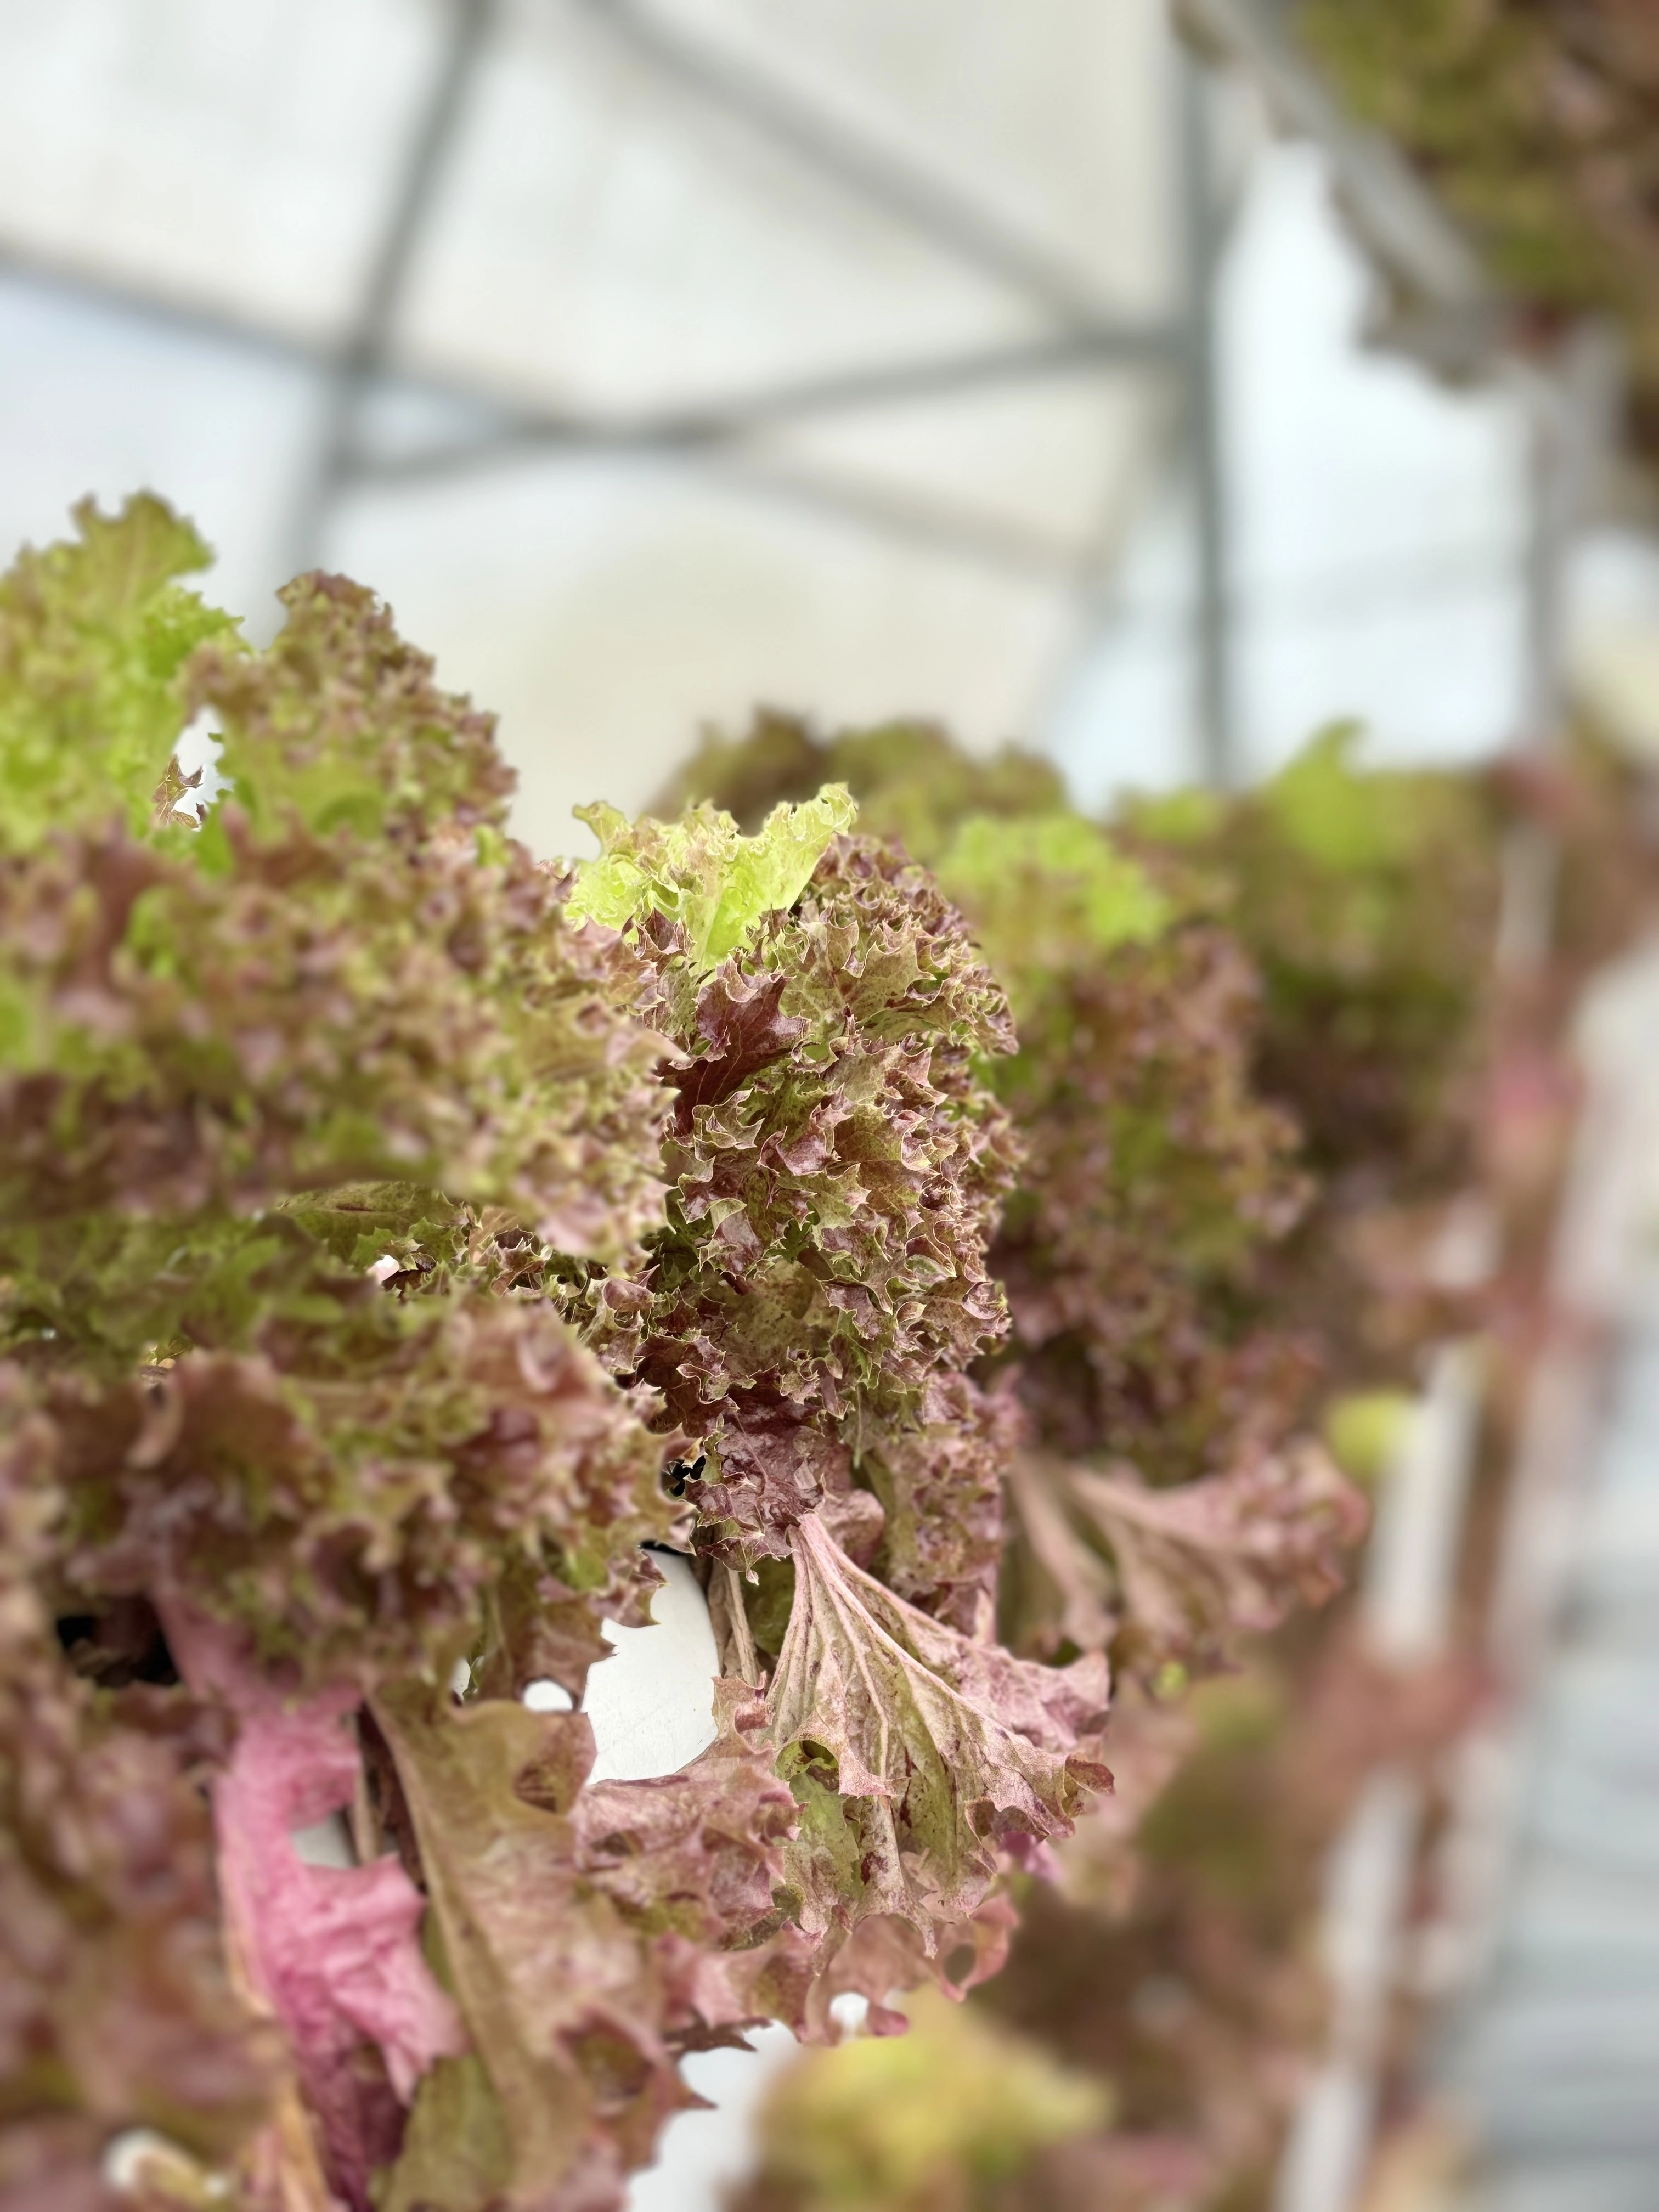 Hydroponic Red Lolo lettuce-12506150